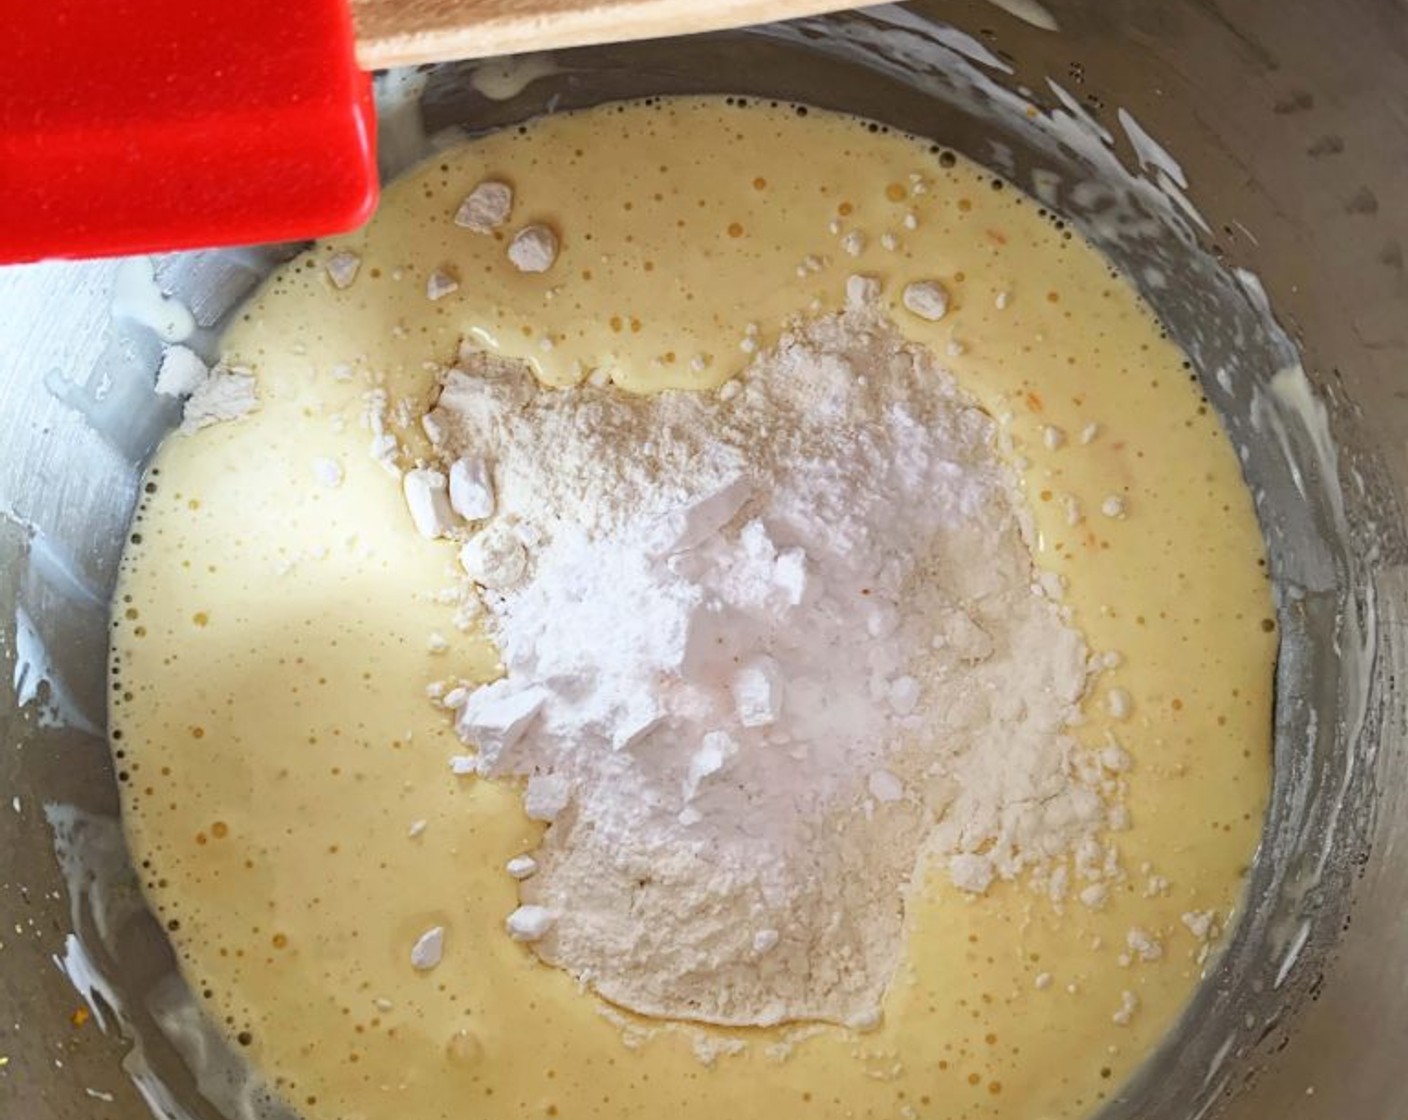 step 4 In a separate bowl combine Cake Flour (1 2/3 cups), Salt (1 pinch), and Baking Powder (1 Tbsp). Add the dry ingredients to the bowl of your electric mixer all at once.